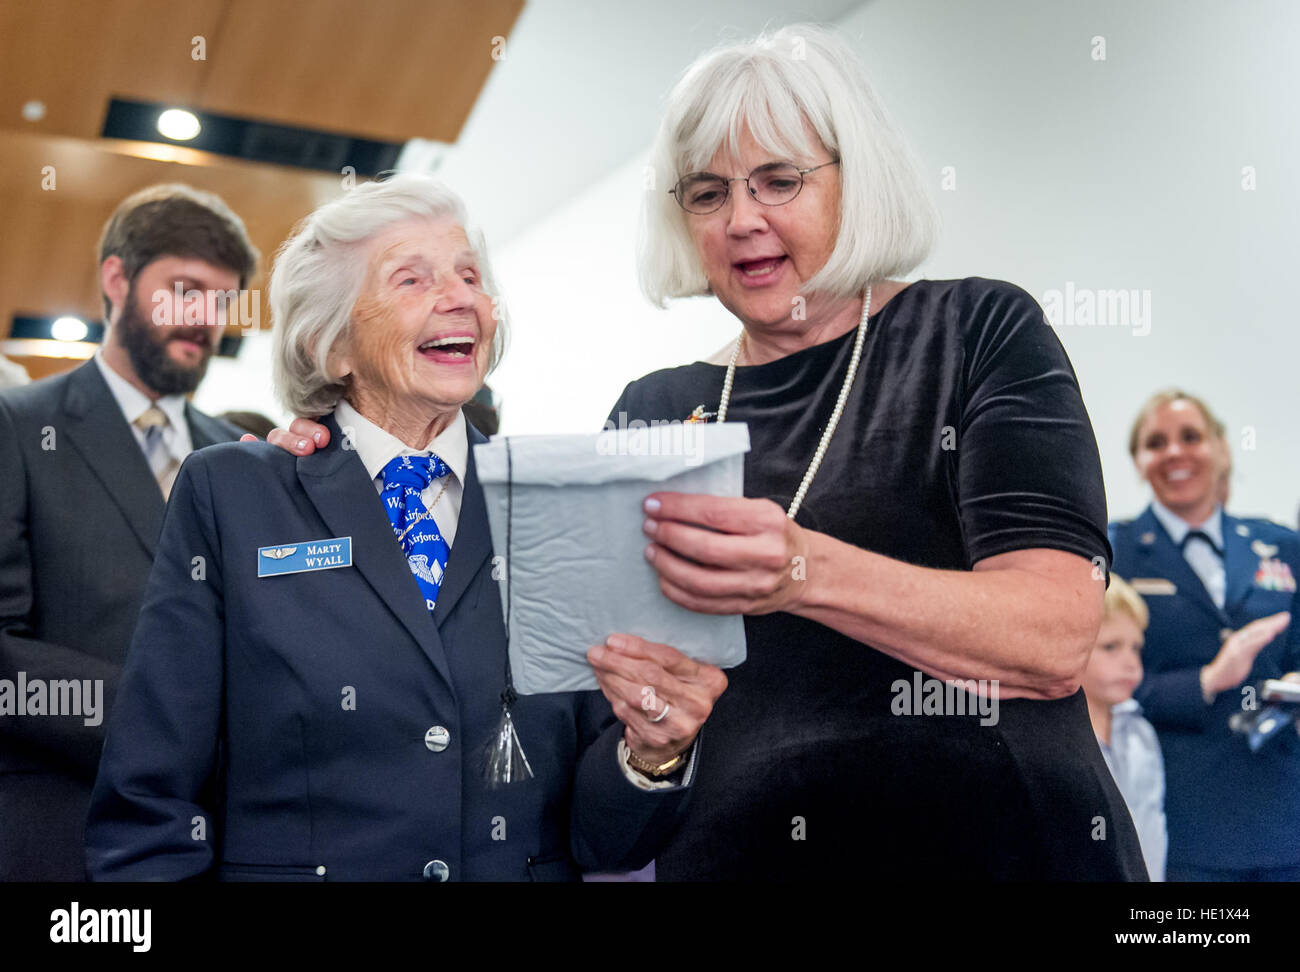 Terry Lee Harmon, daughter of Elaine Danforth Harmon, who served as a Women Airforce Service Pilot WASP during World War II, sings the U.S. Air Force song with former WASP, Mary Anna 'Marty' Martin Wyall, 95, at a memorial service held at the Women in Military Service for America Memorial, after a funeral service, with full military honors, for Harmon at Arlington National Cemetery, Sept. 7, 2016. Harmon's family worked since her death in April of 2015, at 95 years old, to reverse a U.S. Army decision, that same year, to revoke the eligibility for WASPs for interment at Arlington. The WASPs, a Stock Photo